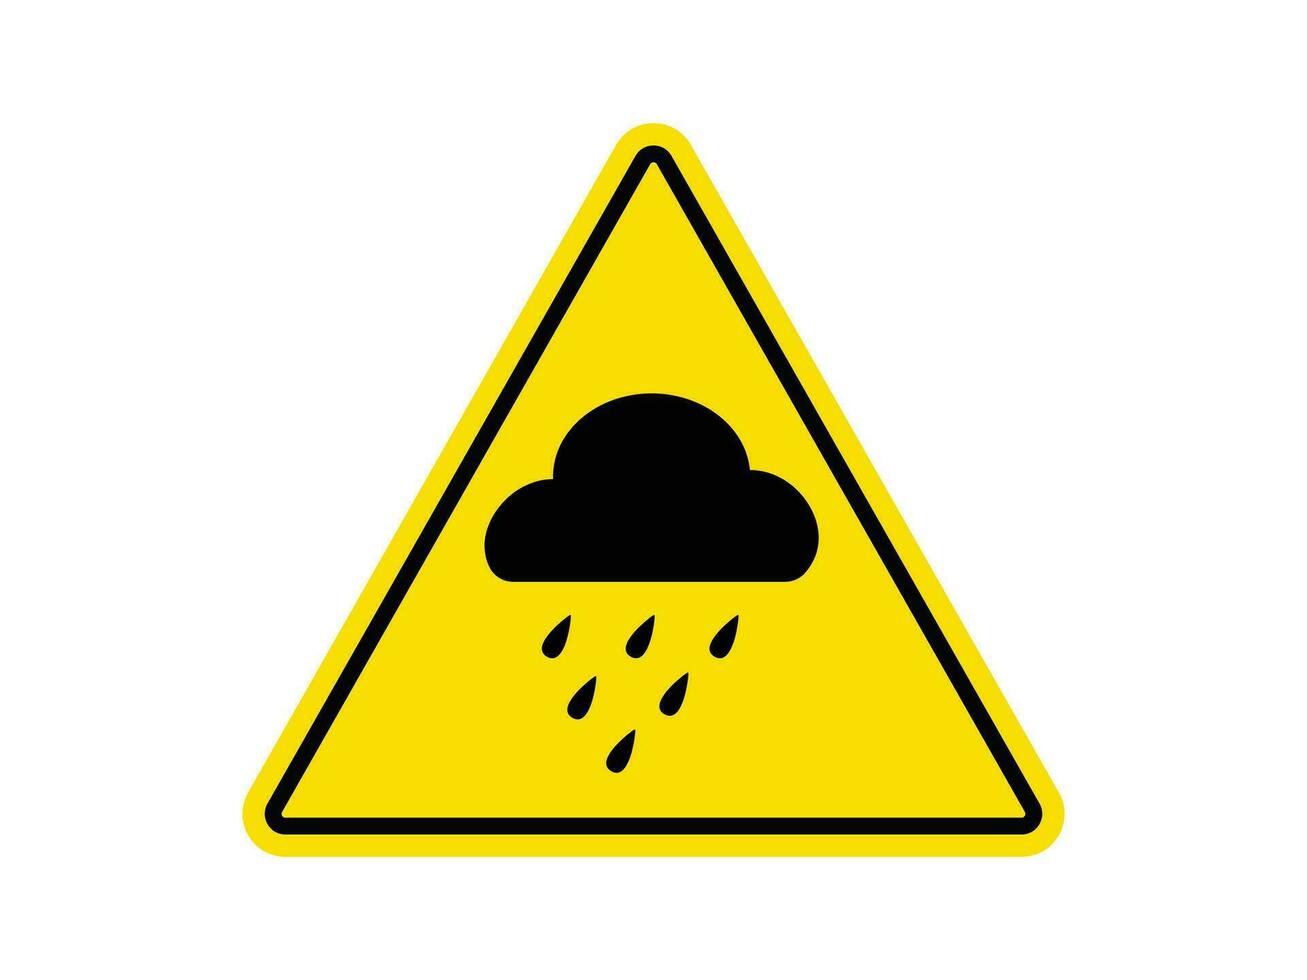 Rain warnings sign, Heavy rain and accident, Caution, clouds and storm , vector illustration.